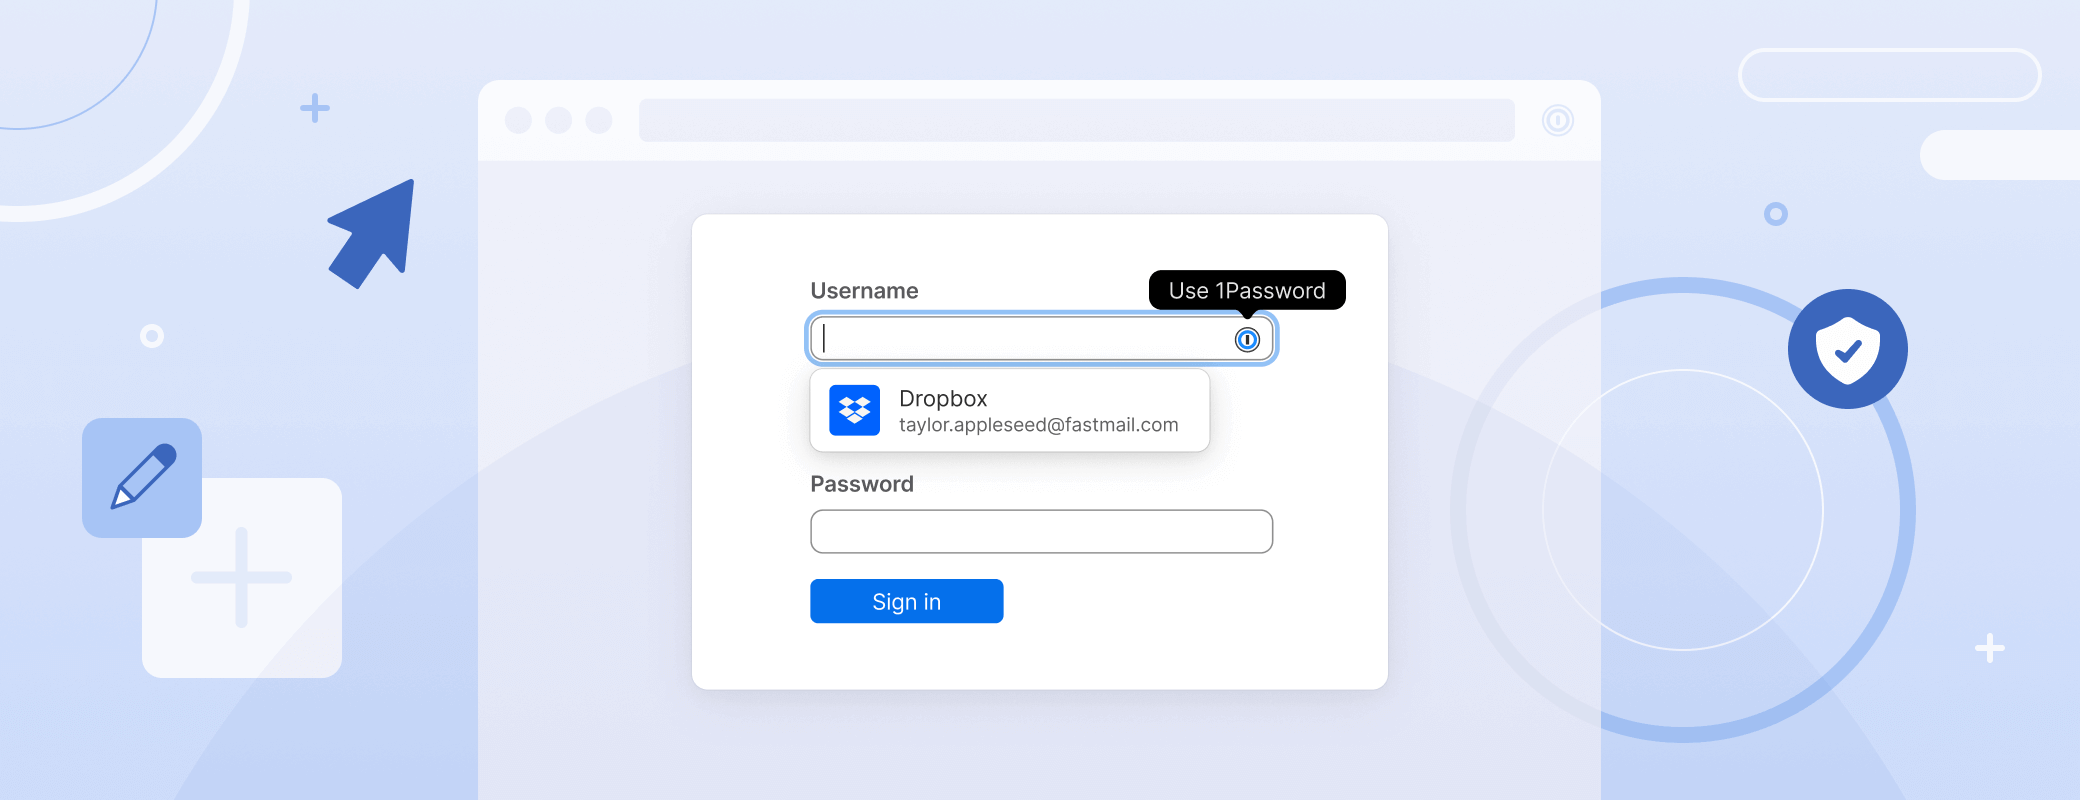 1Password product enhancements [Winter edition]: Password autofill, saving, and more